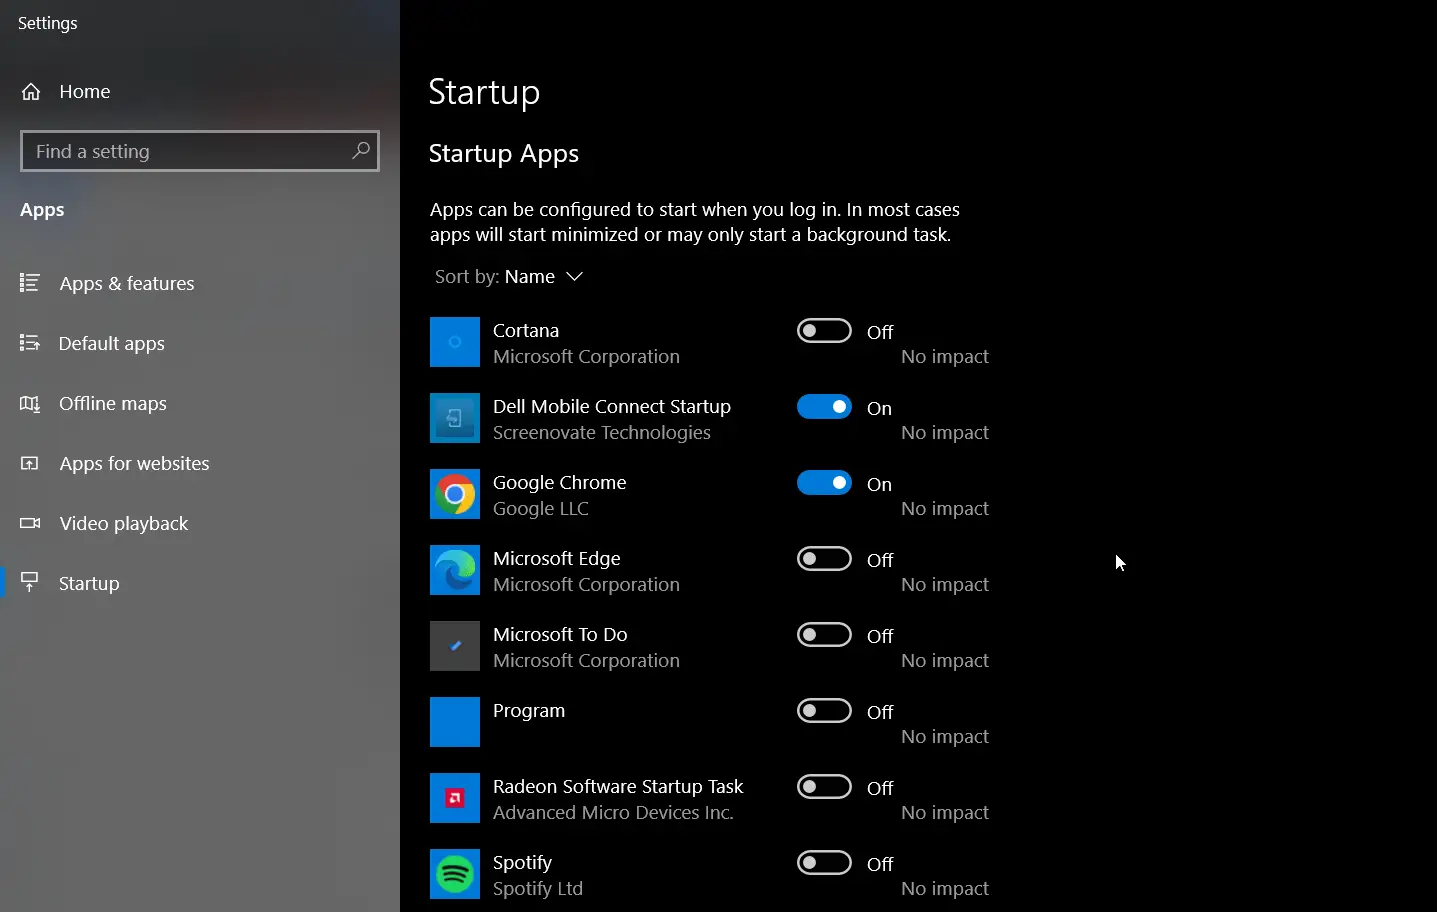 Enable any app from them that you want to run automatically at startup